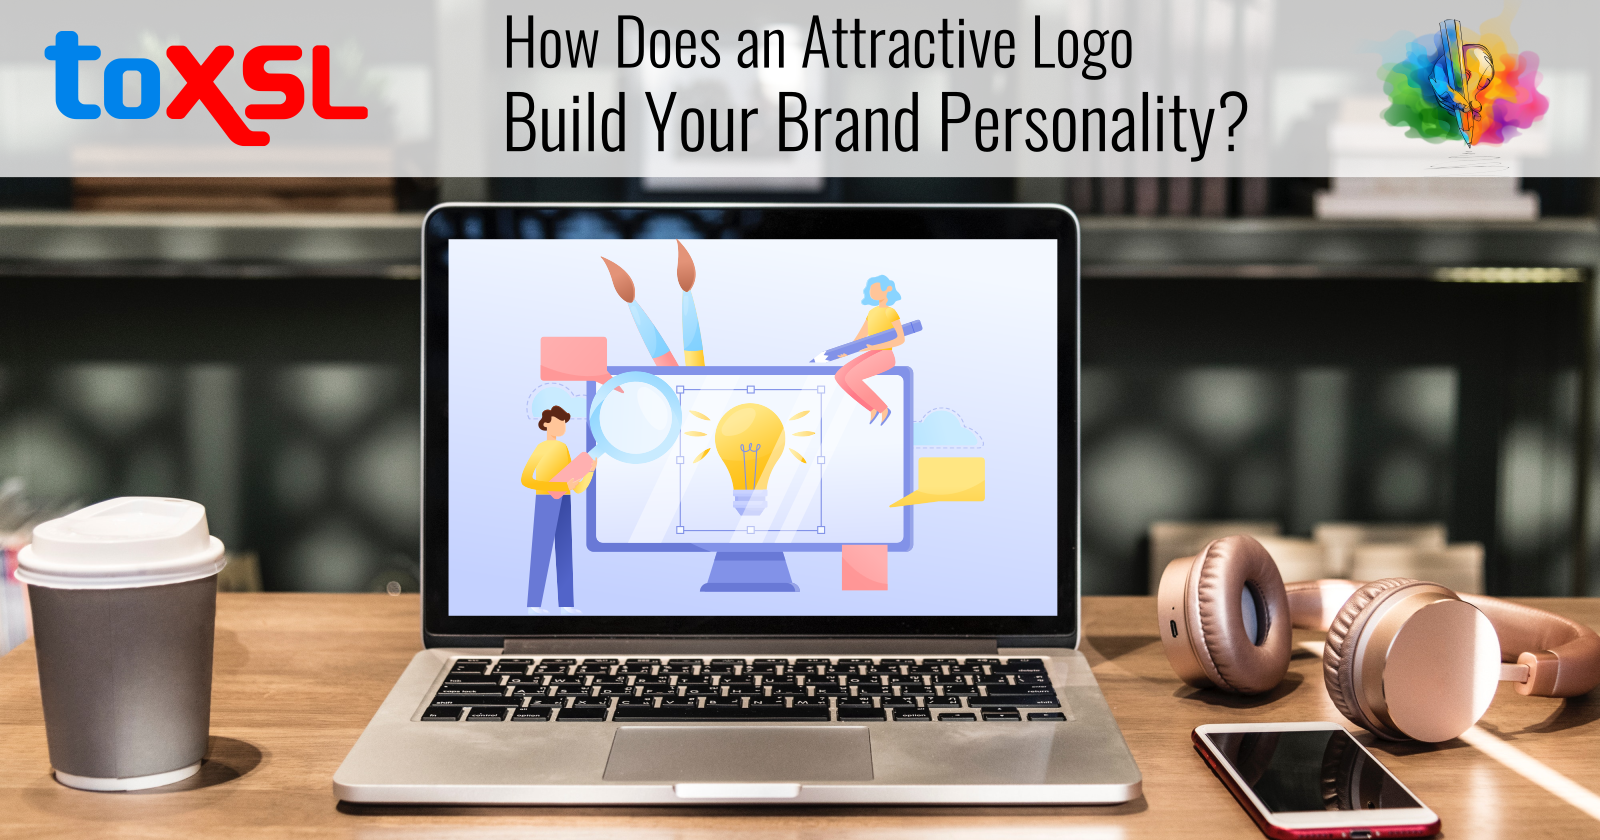 How Does an Attractive Logo Build Your Brand Personality?